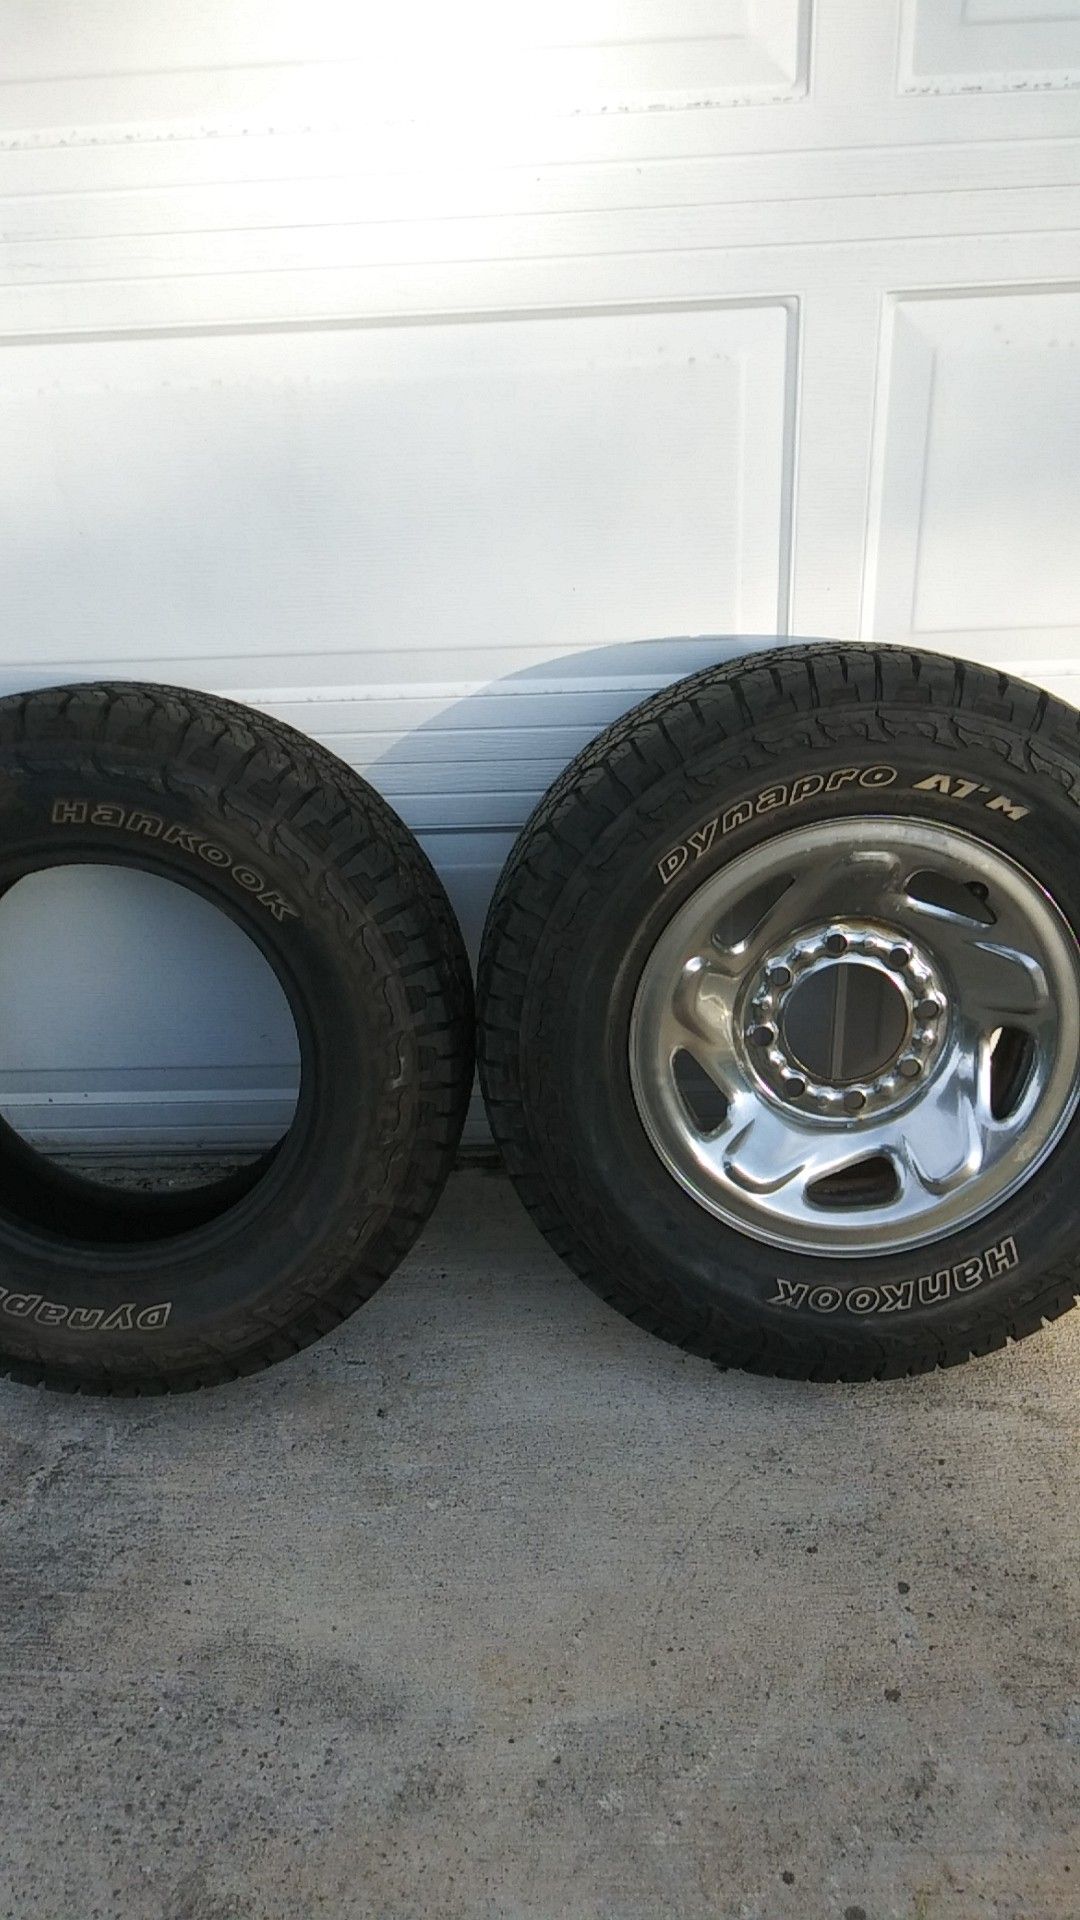 Hankook Dynapro ATM Tires